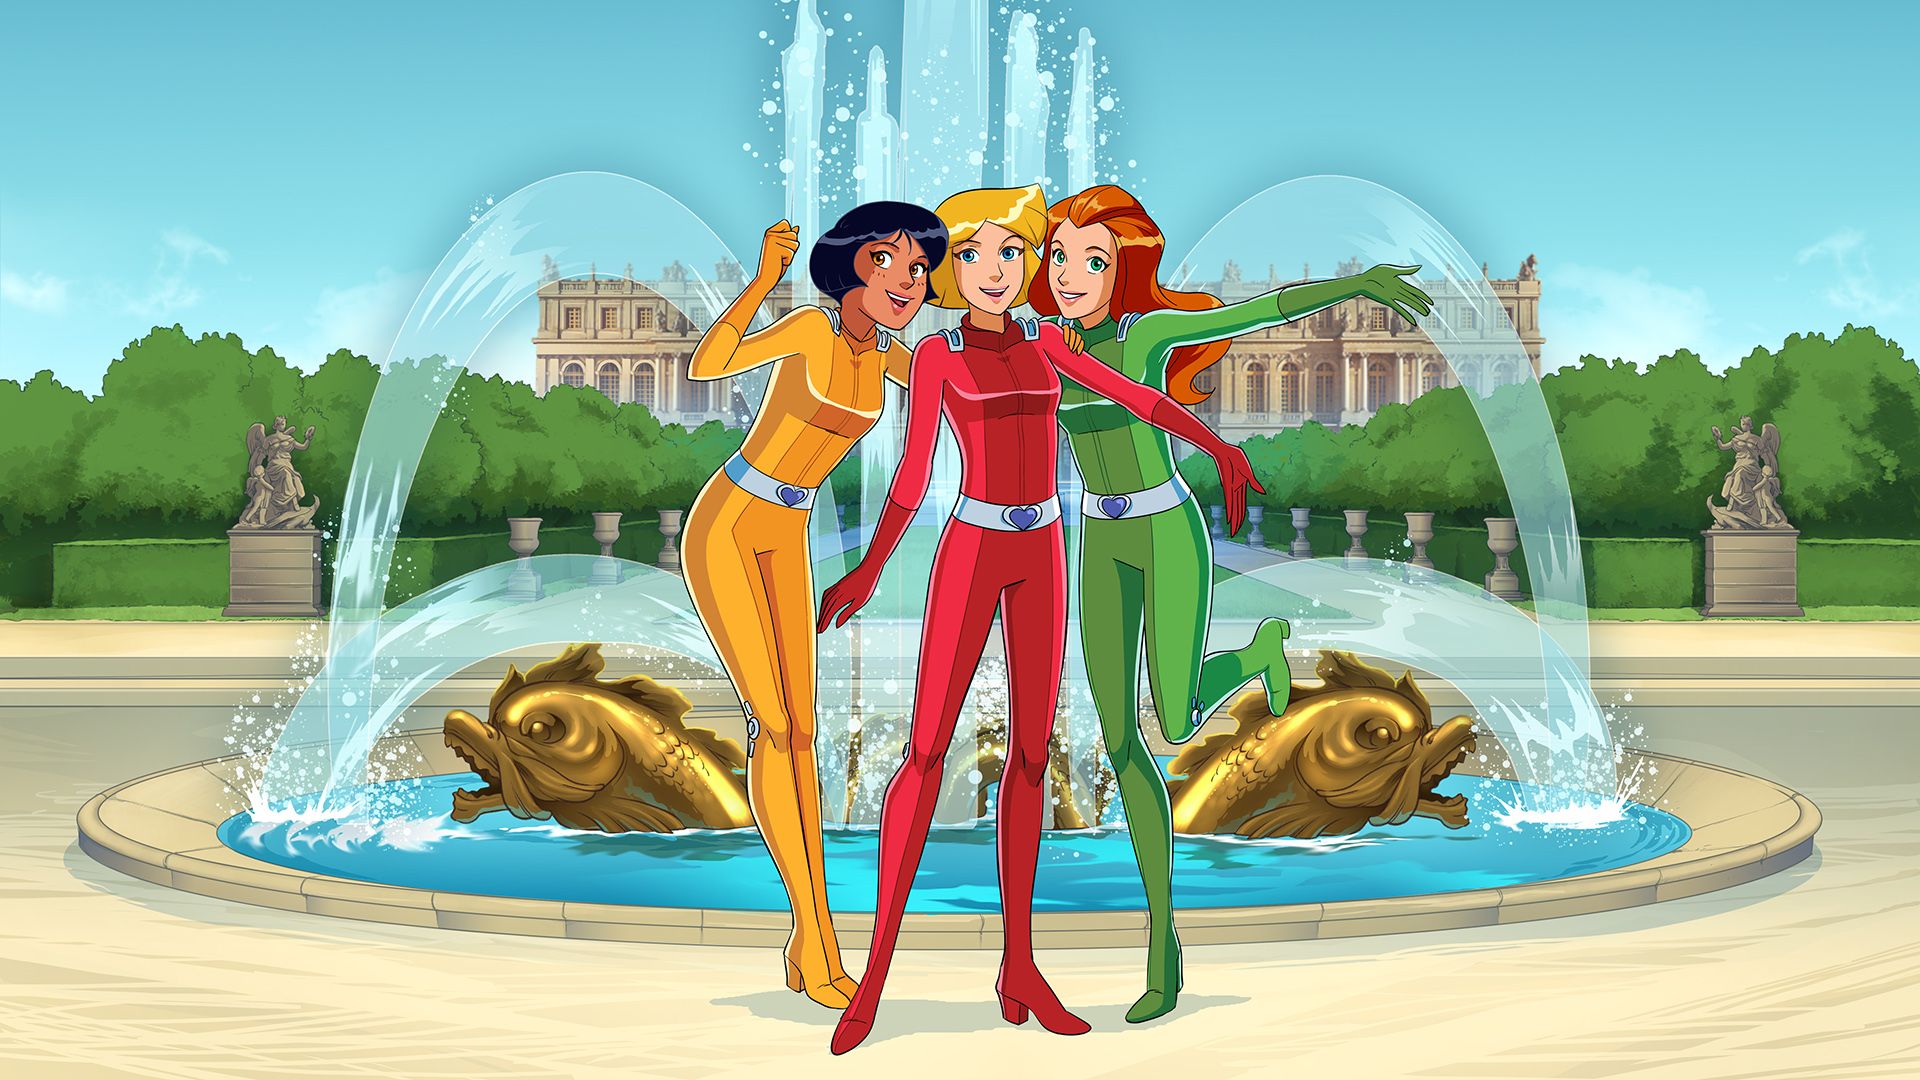 Totally Spies! background